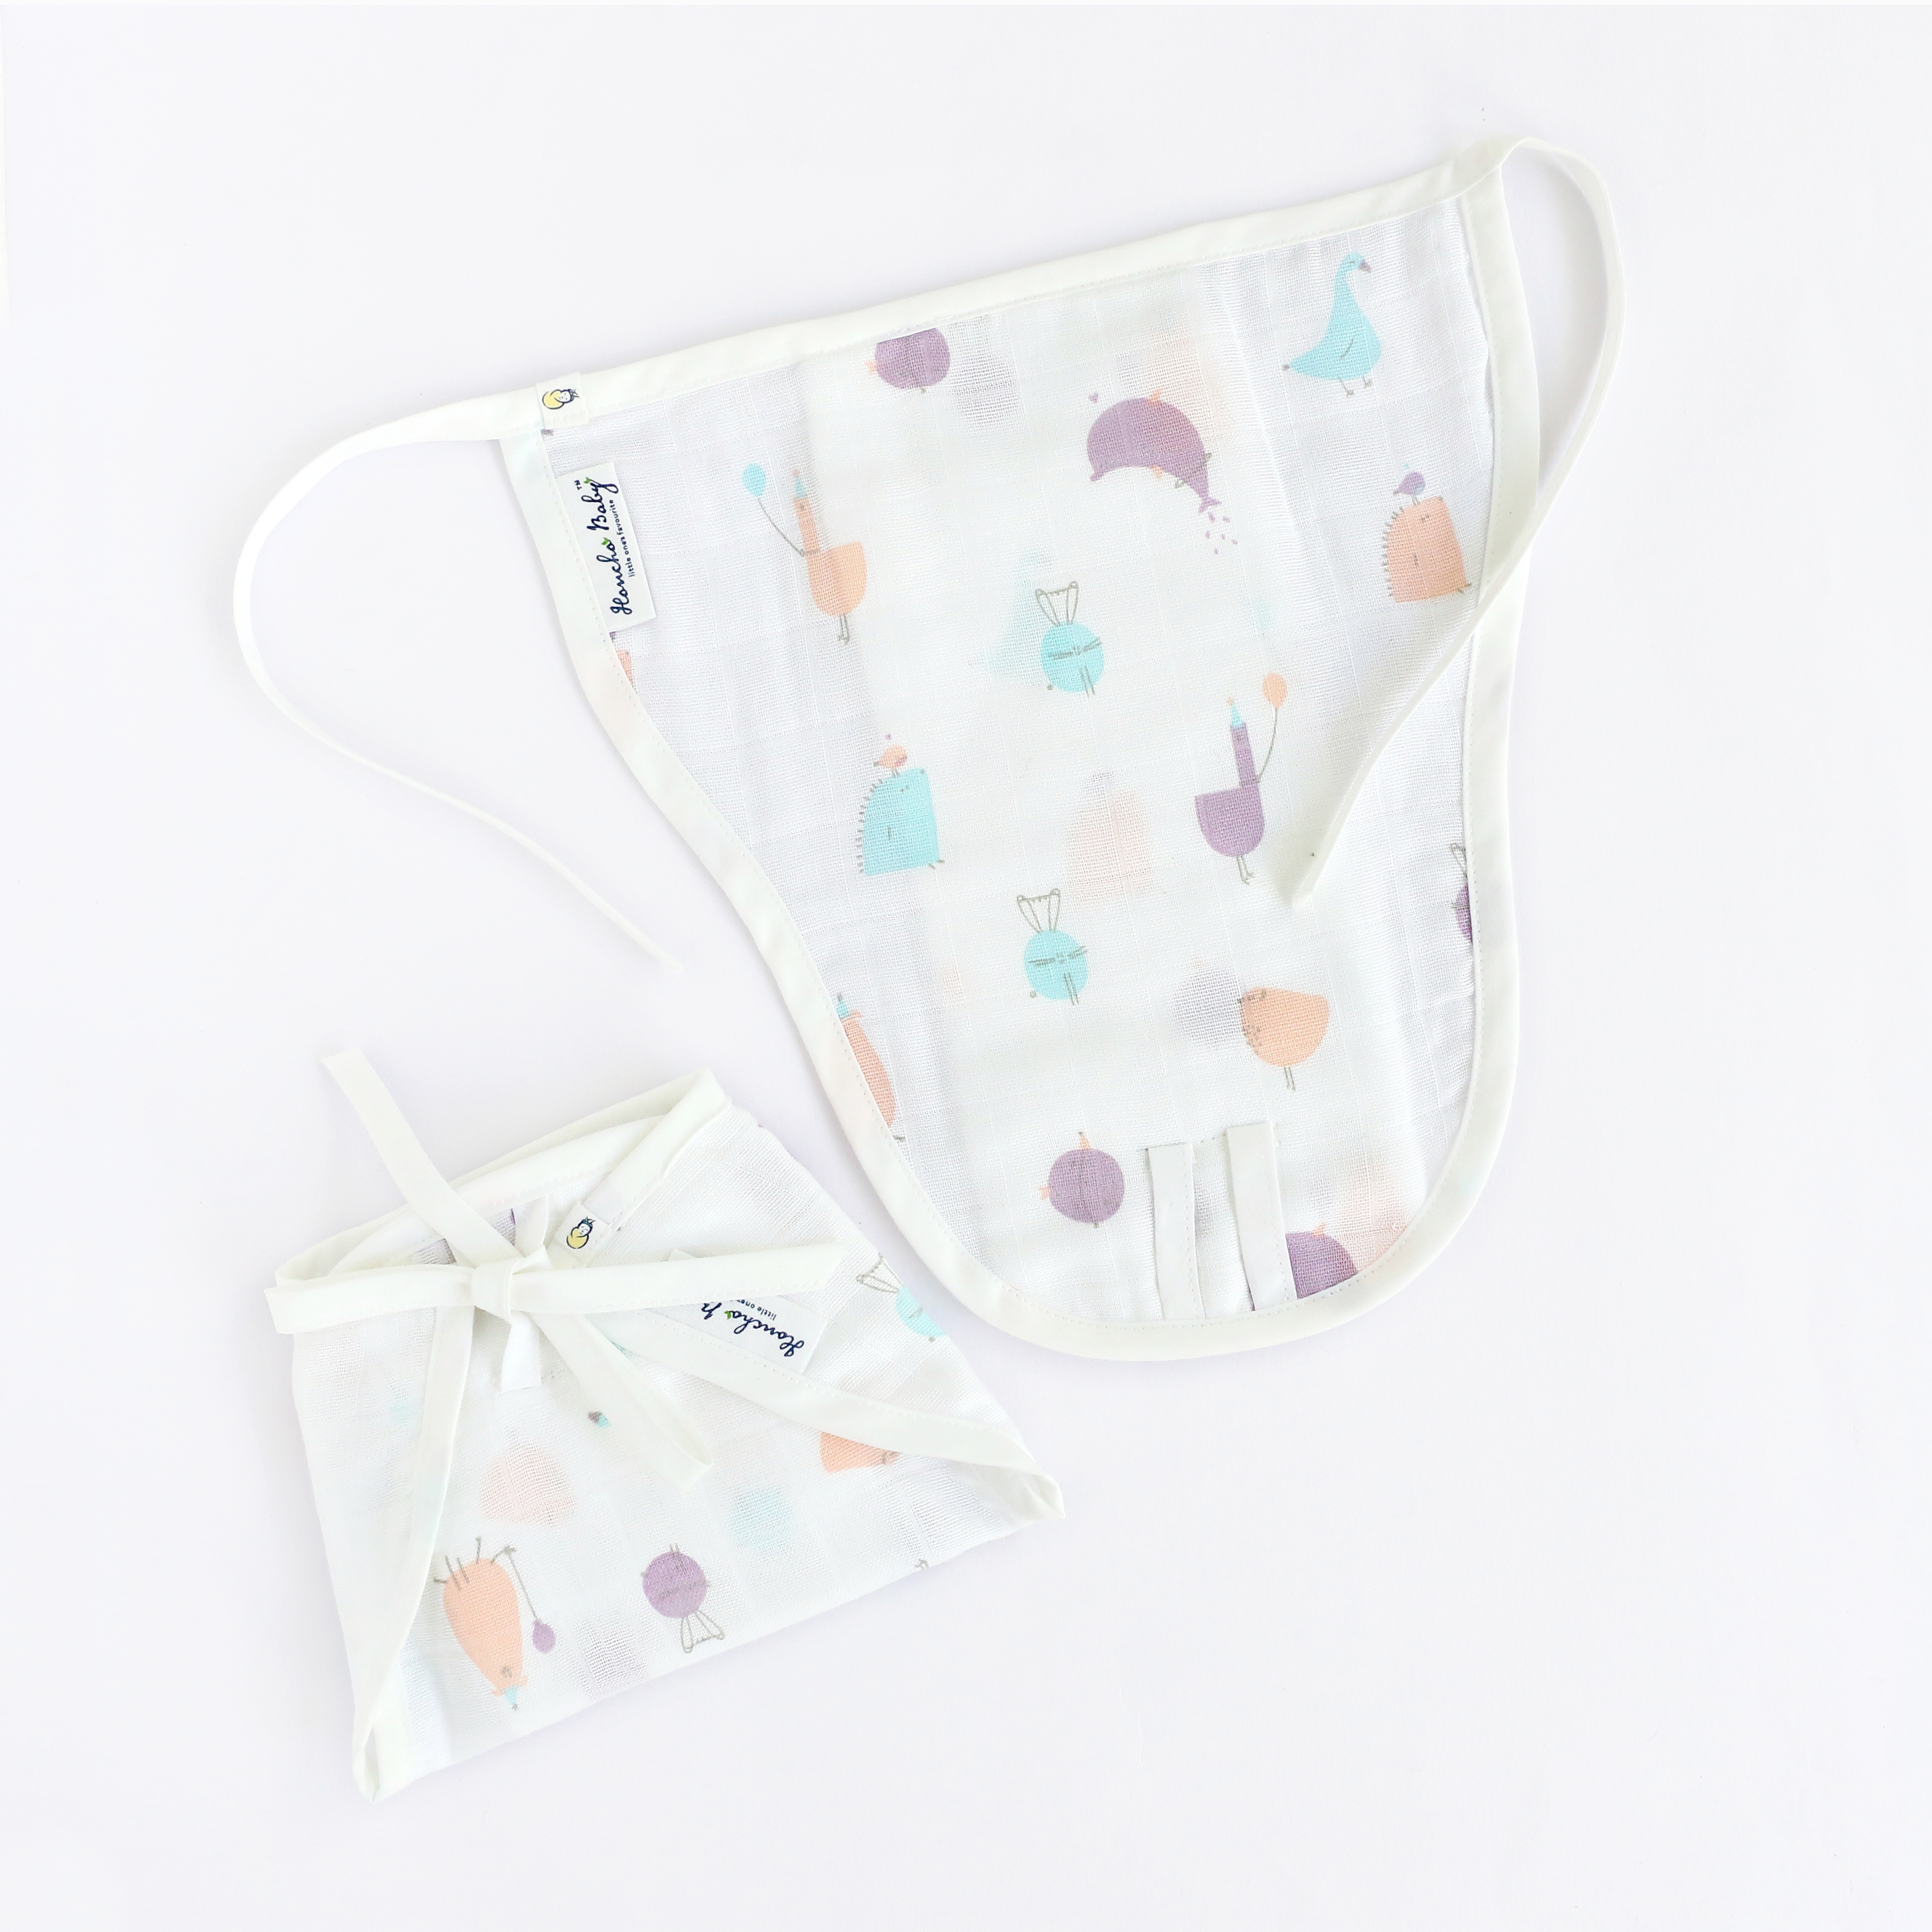 Reusable Muslin Nappies / Langot (4 Layered Central Panel) Assorted 3 Pack NEW